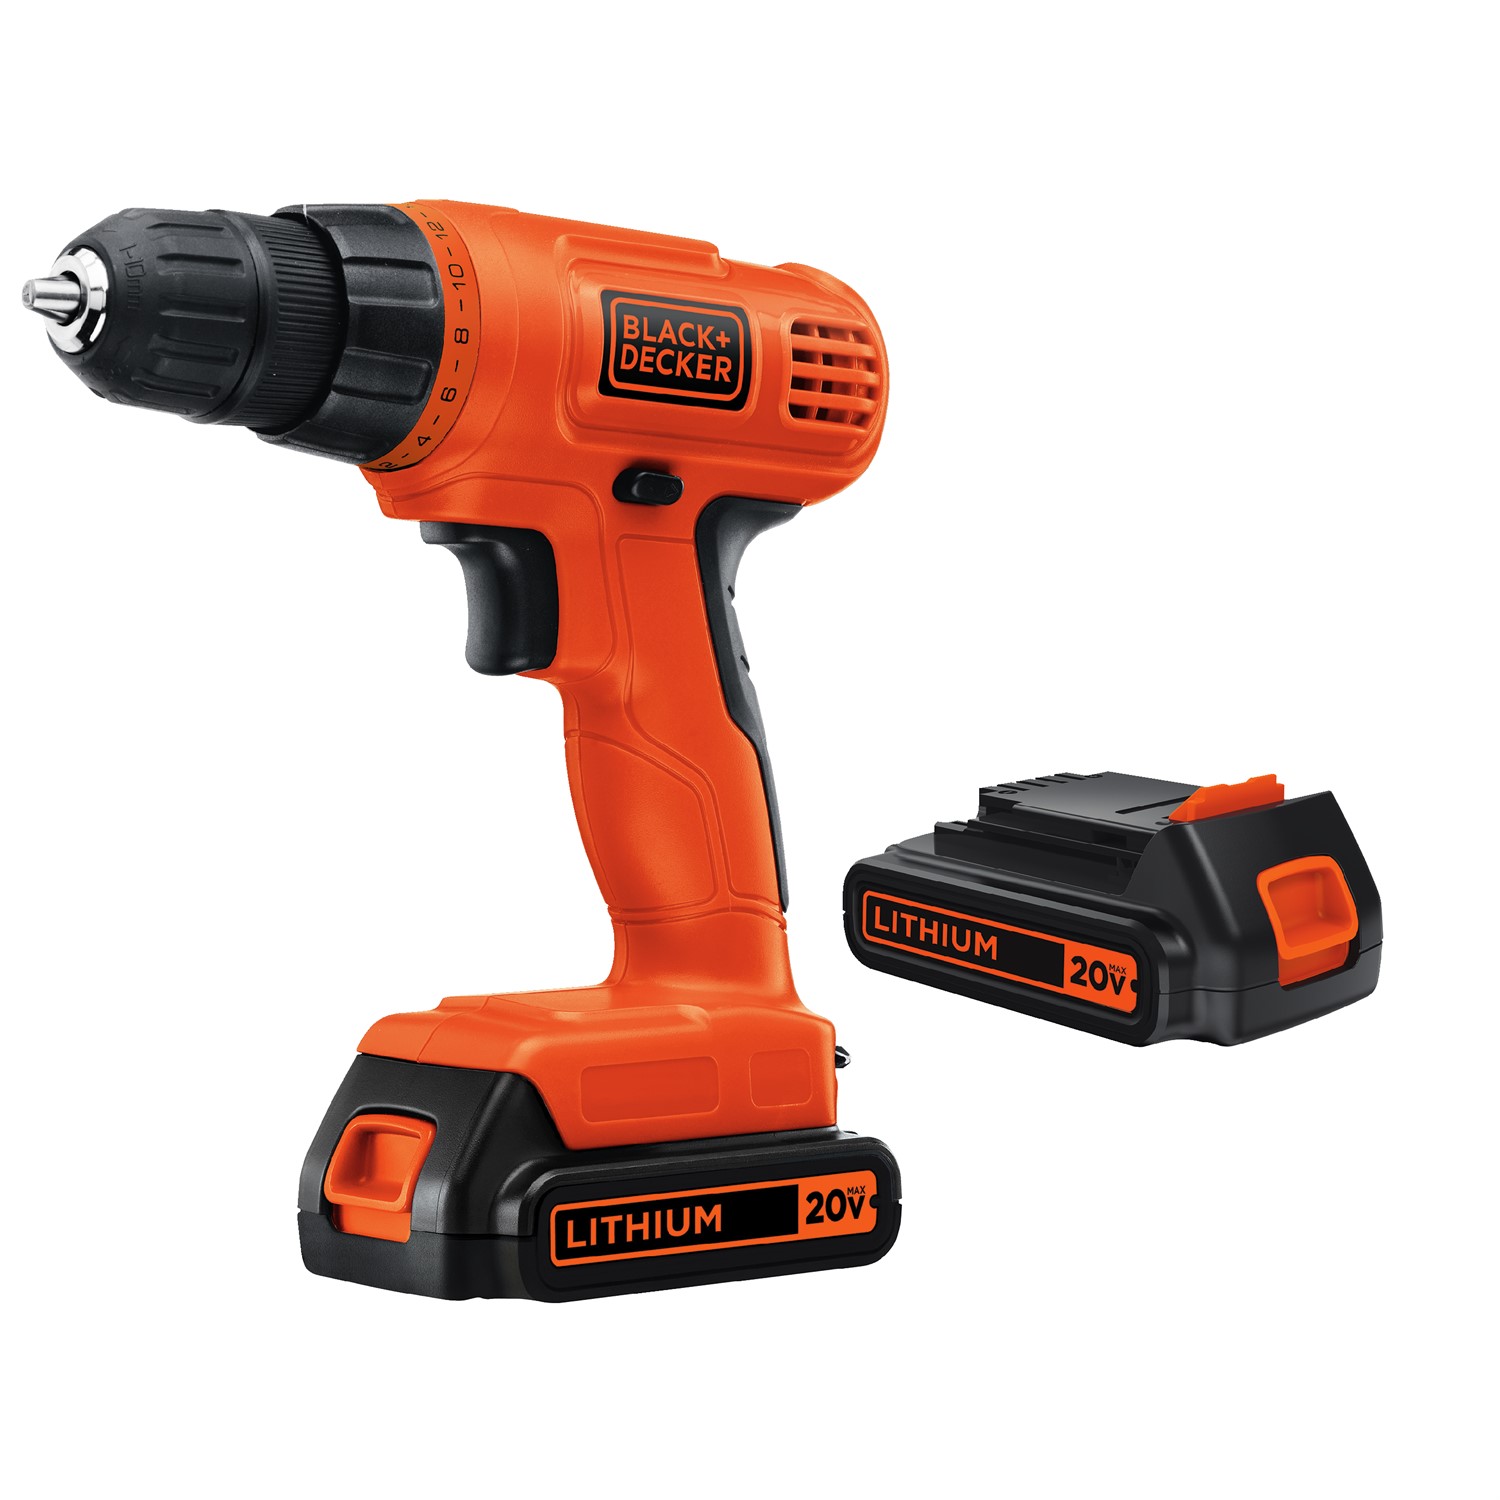 Black+Decker 20V max lithium ion cordless drill with 2 batteries for $40